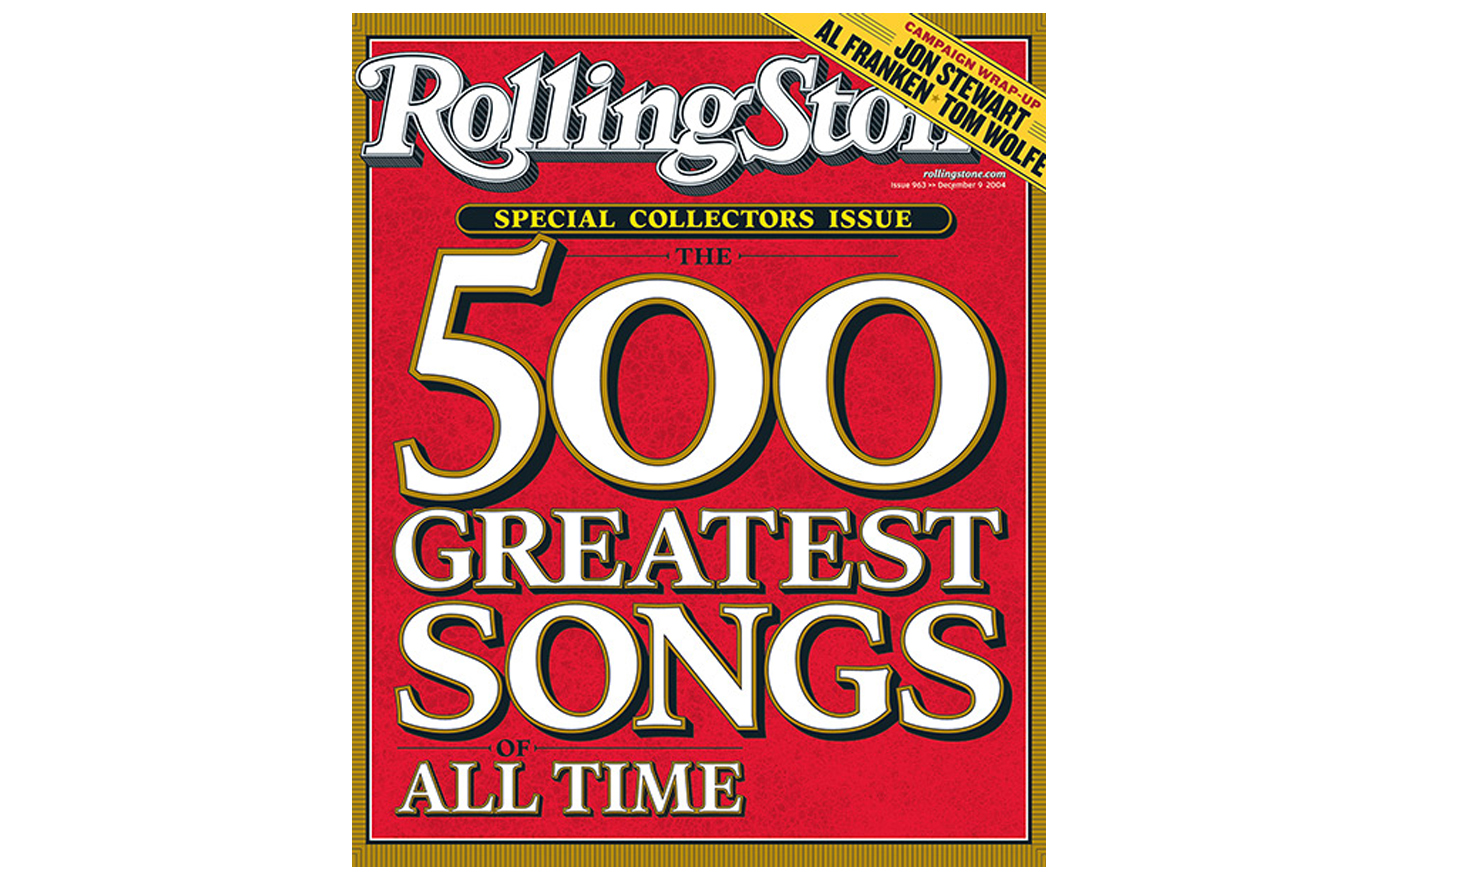 Rolling Stone's 500 Greatest Songs of All Time